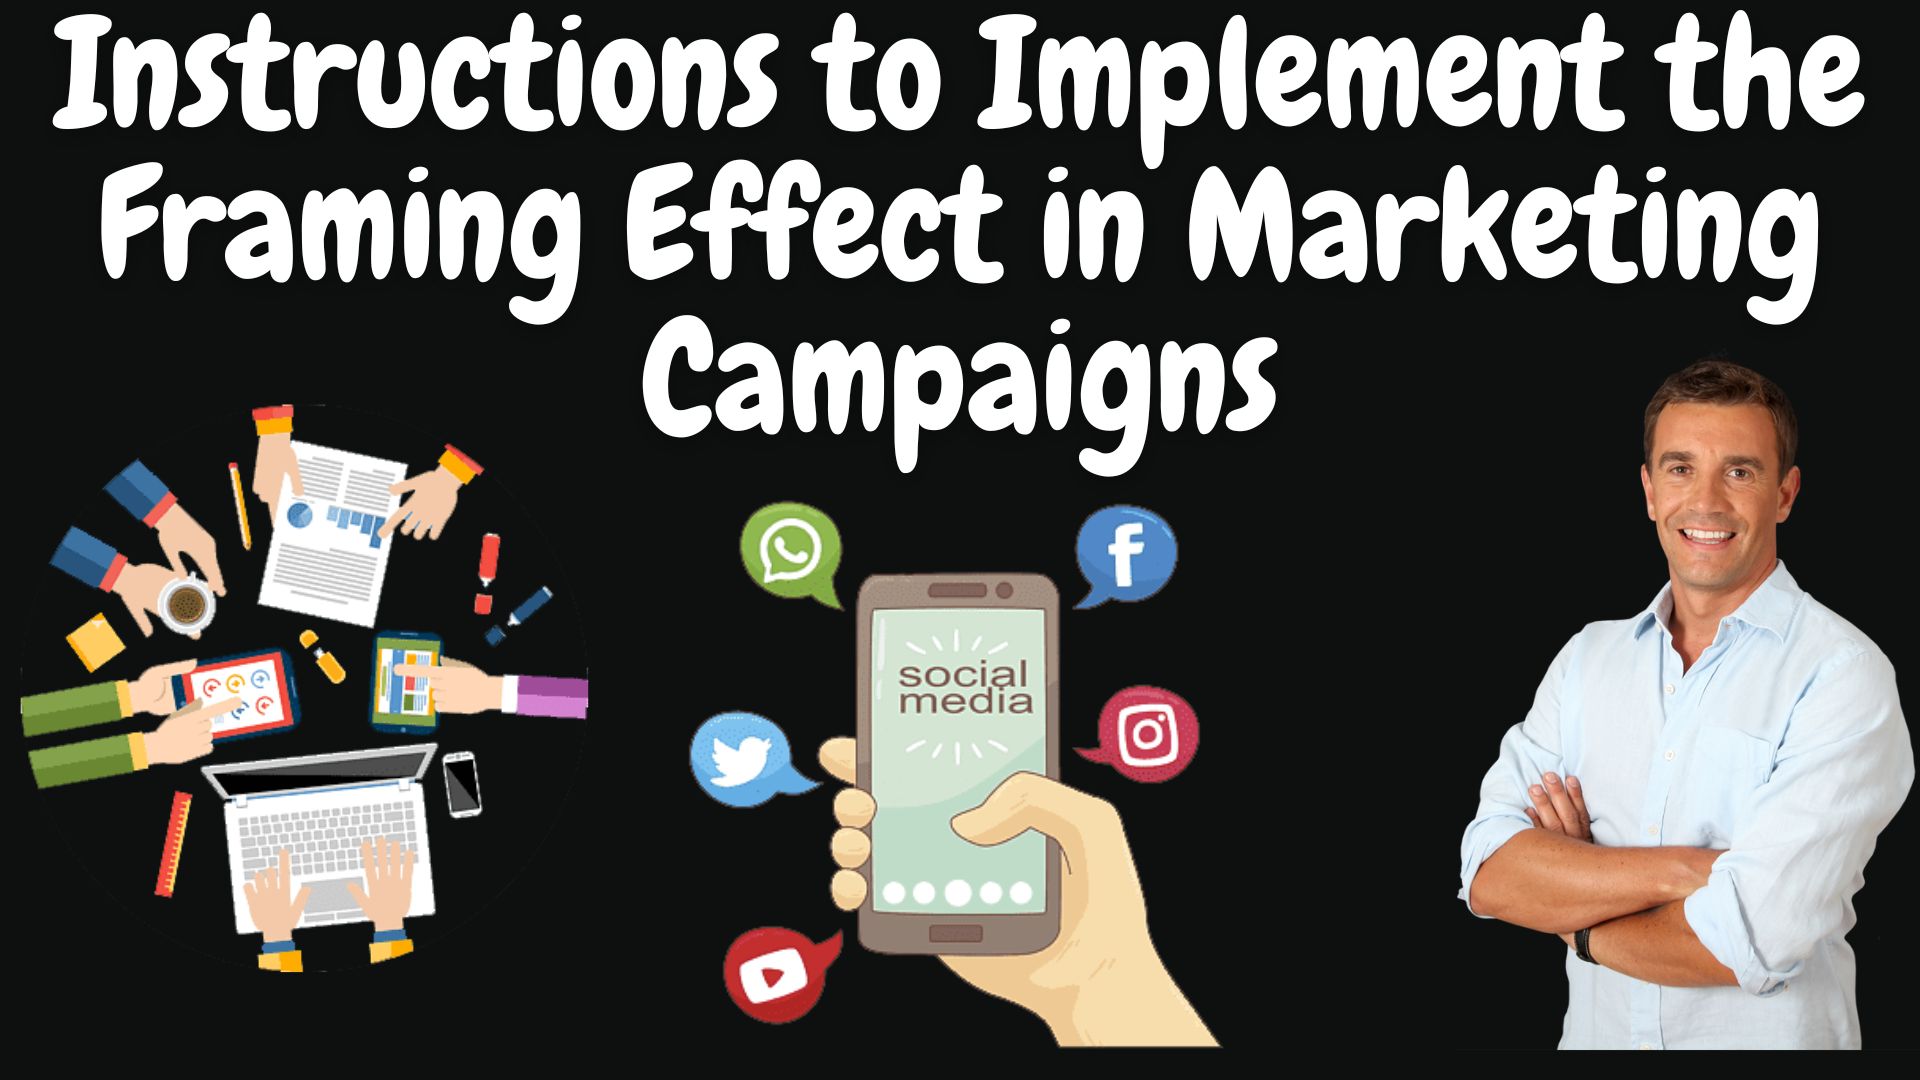 Instructions to implement the framing effect in marketing campaigns